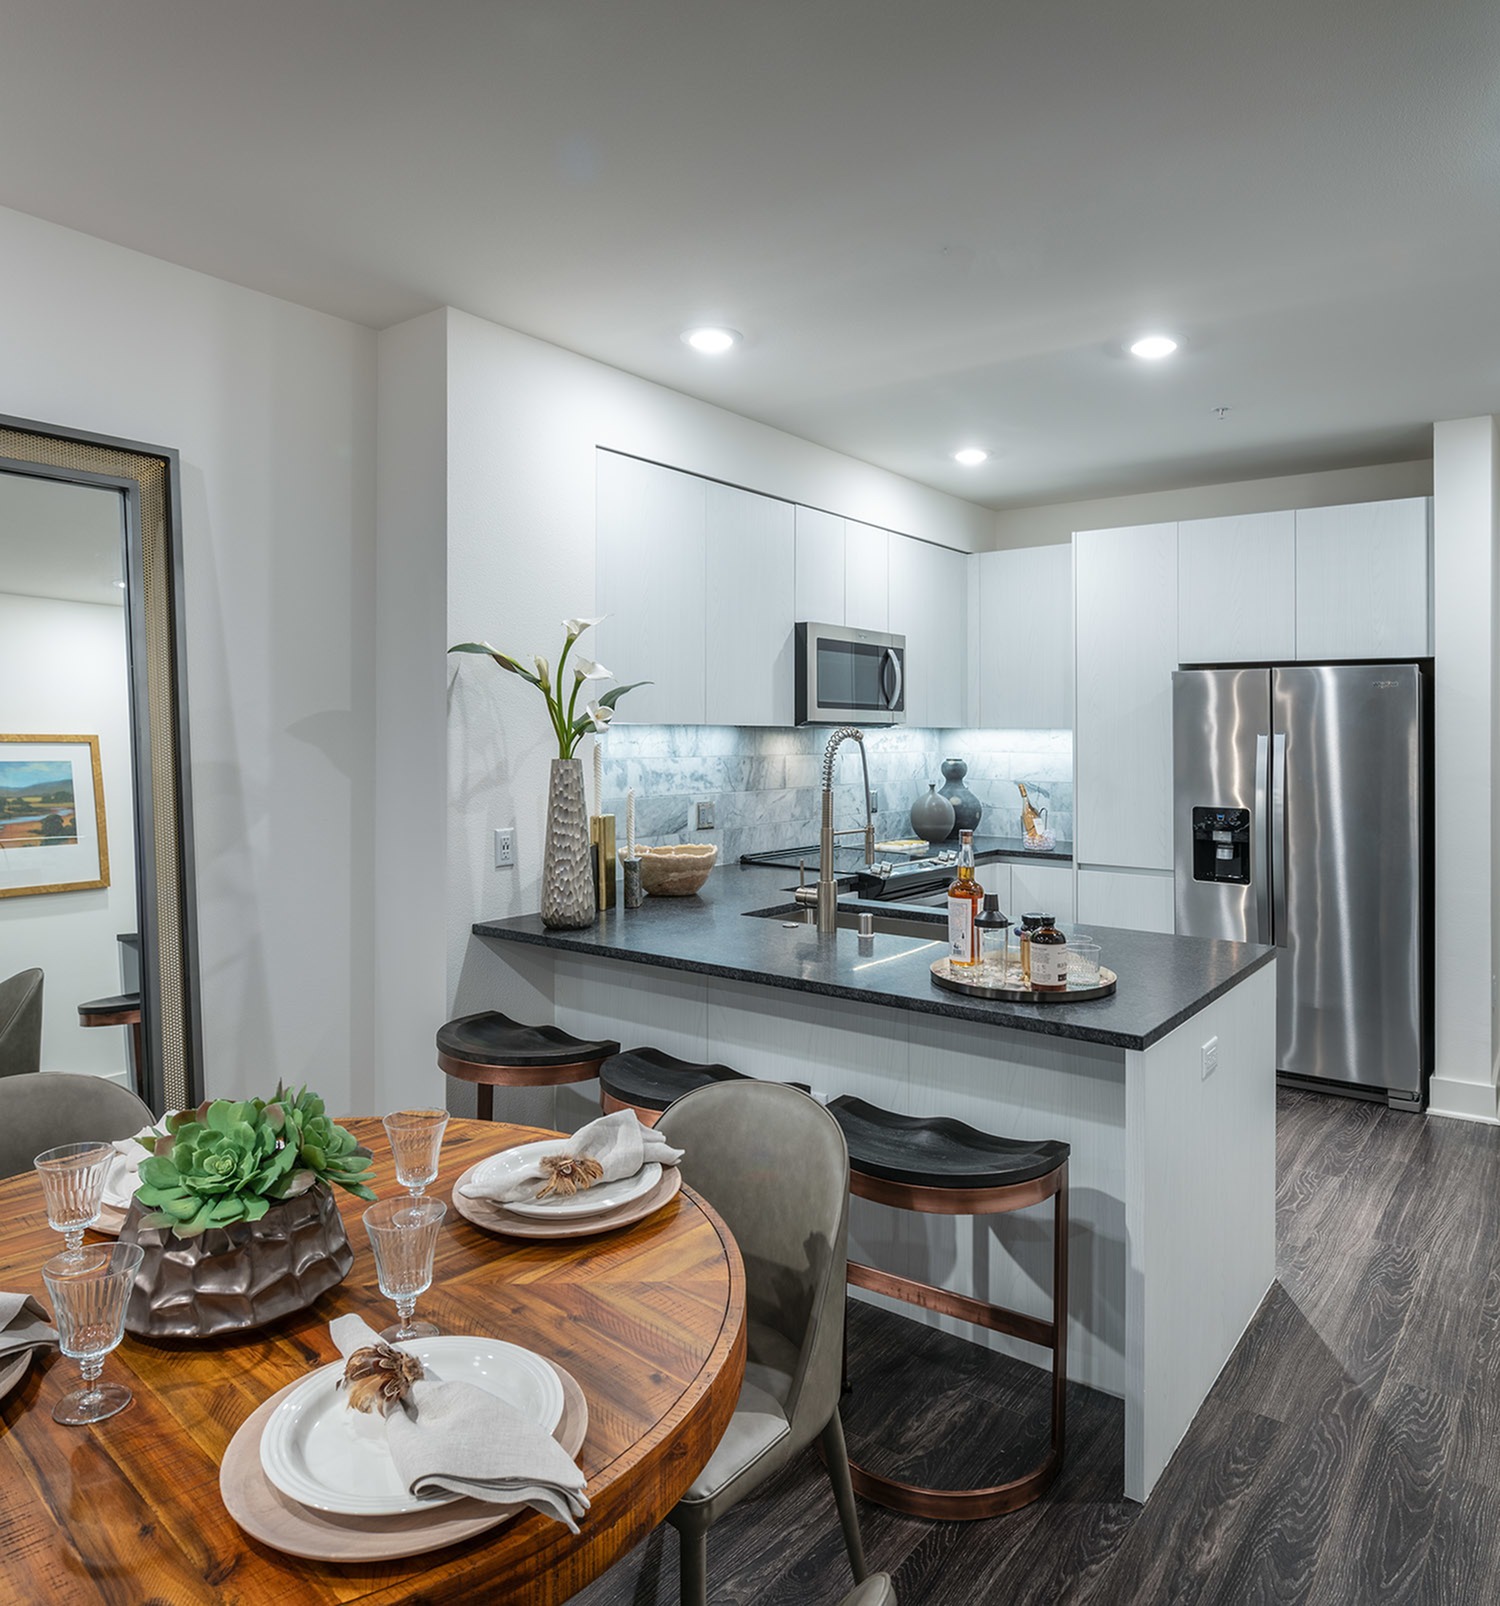 Chef-inspired kitchens with premium appliance packages, spacious islands and pantries*